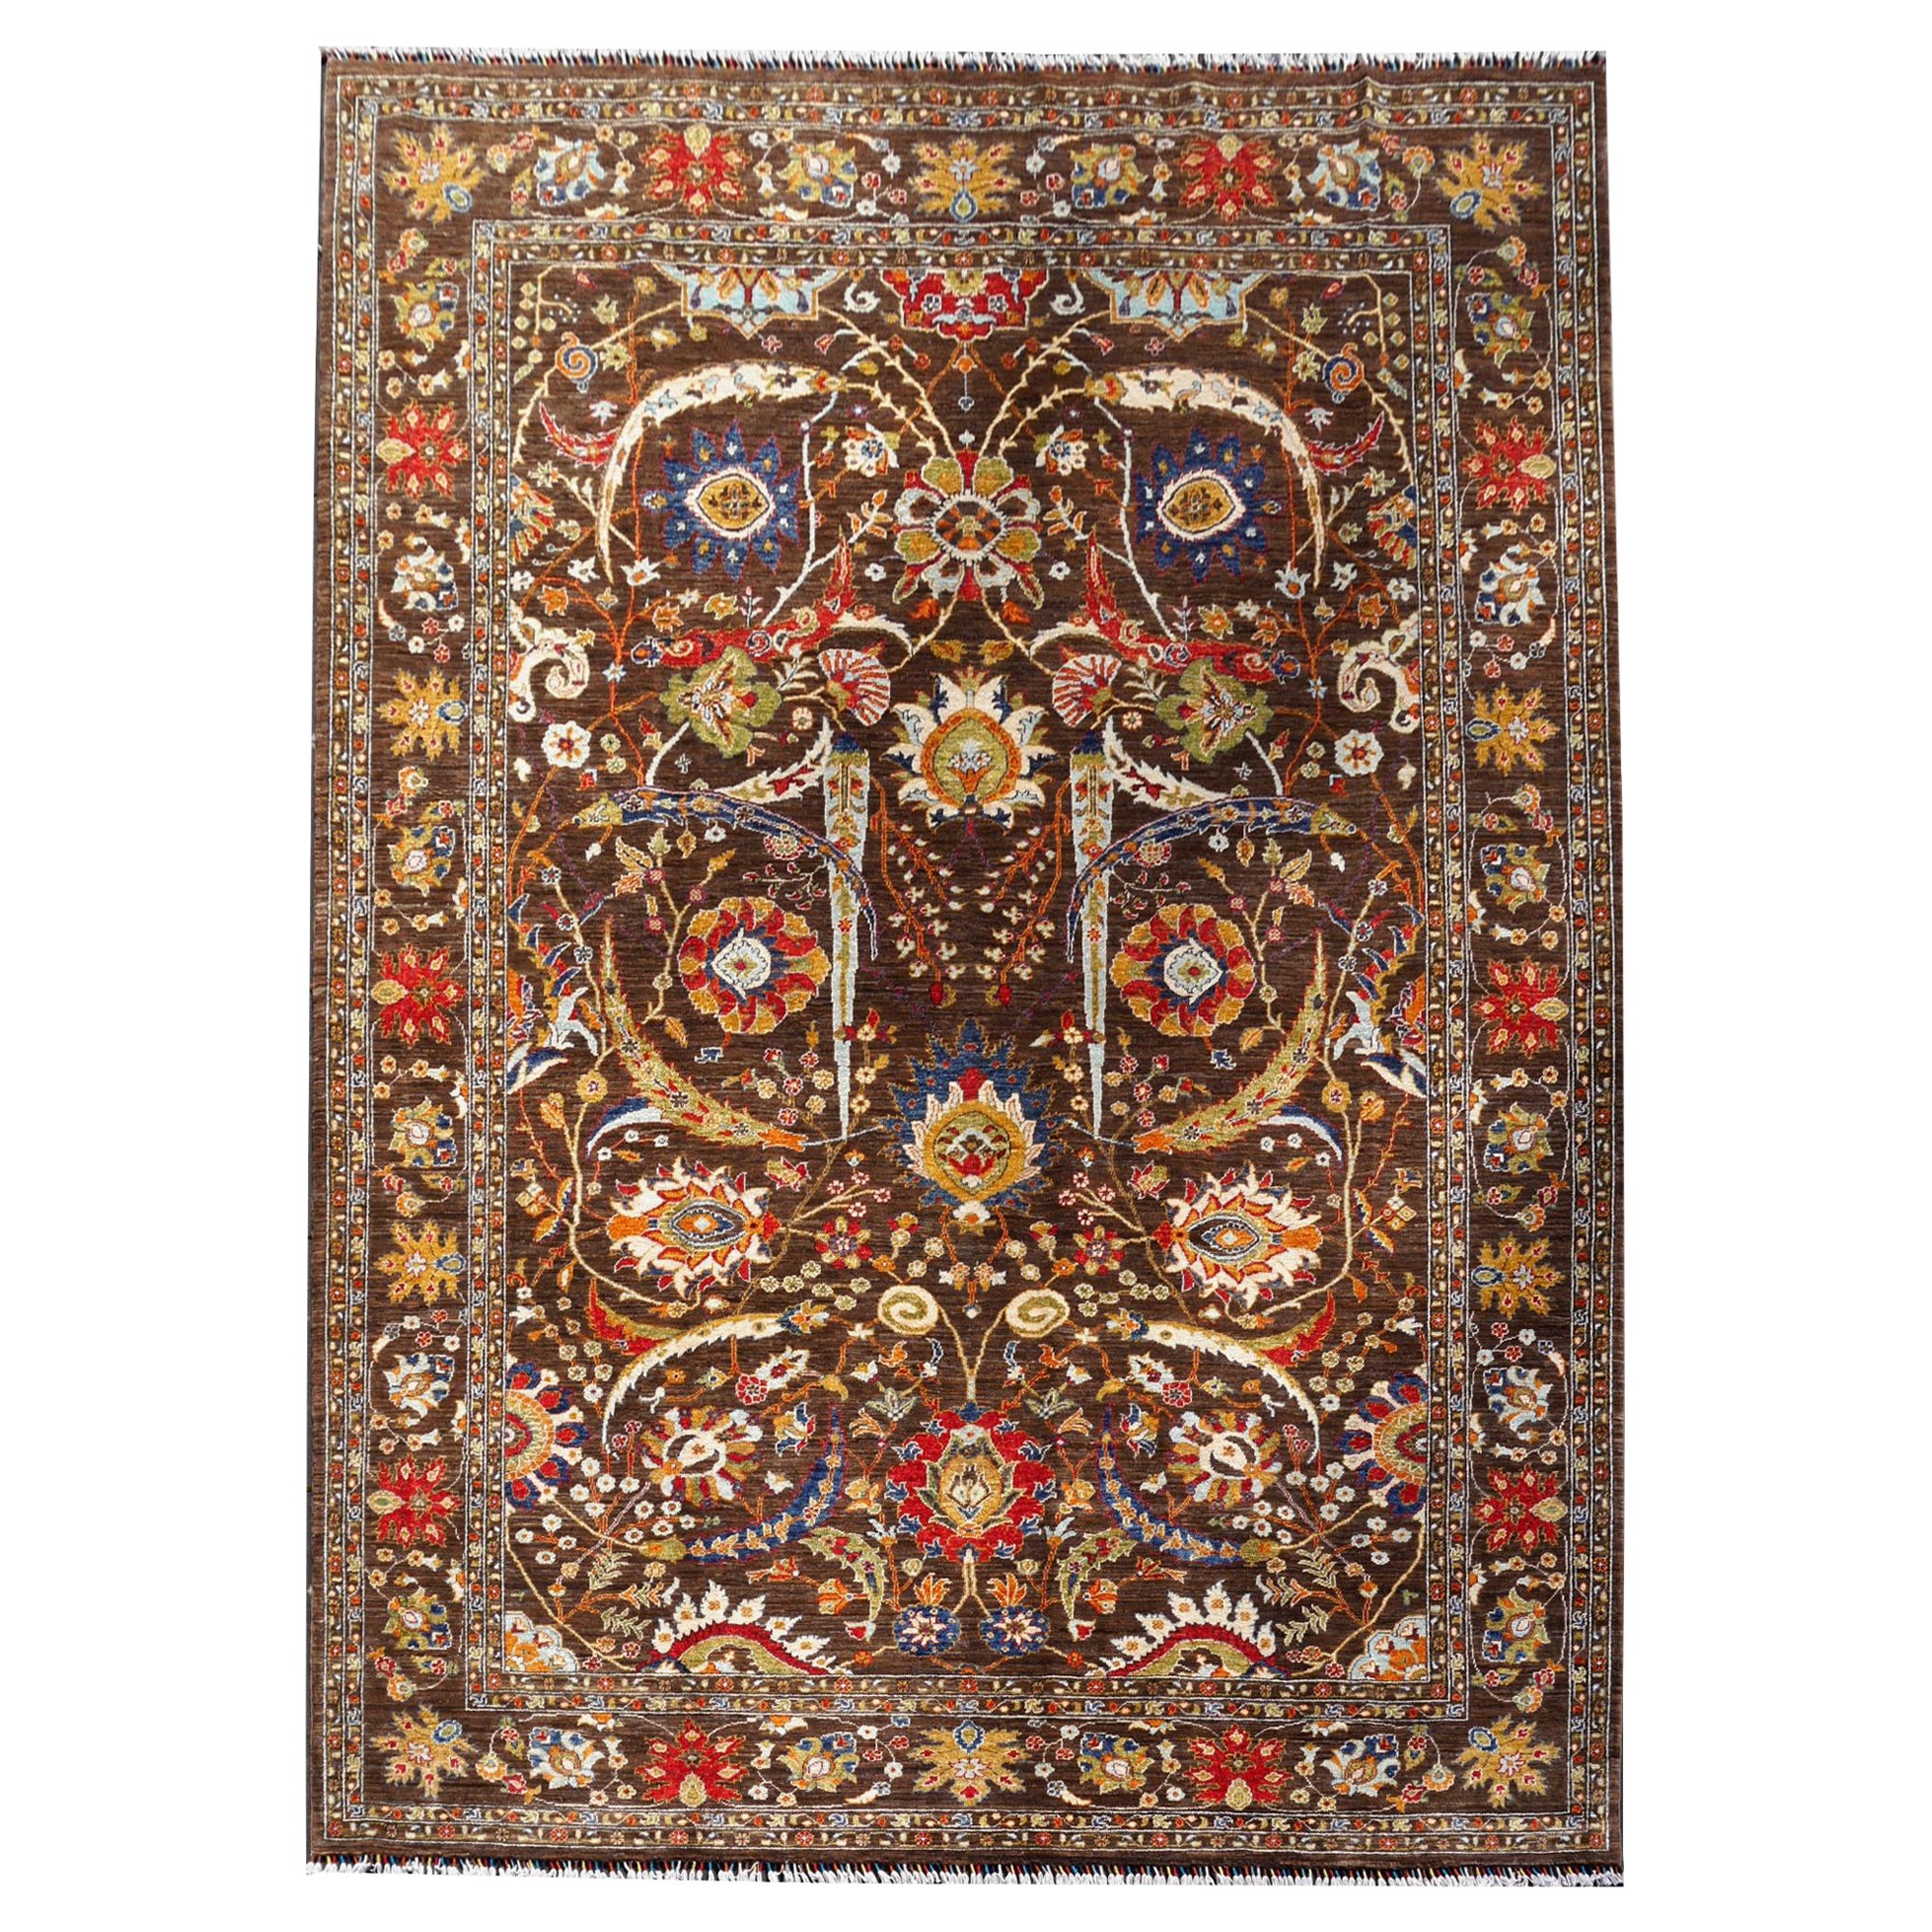 Large Sized Rug in Style of Corcoran’s Clark Sickle-Leaf Carpet Design